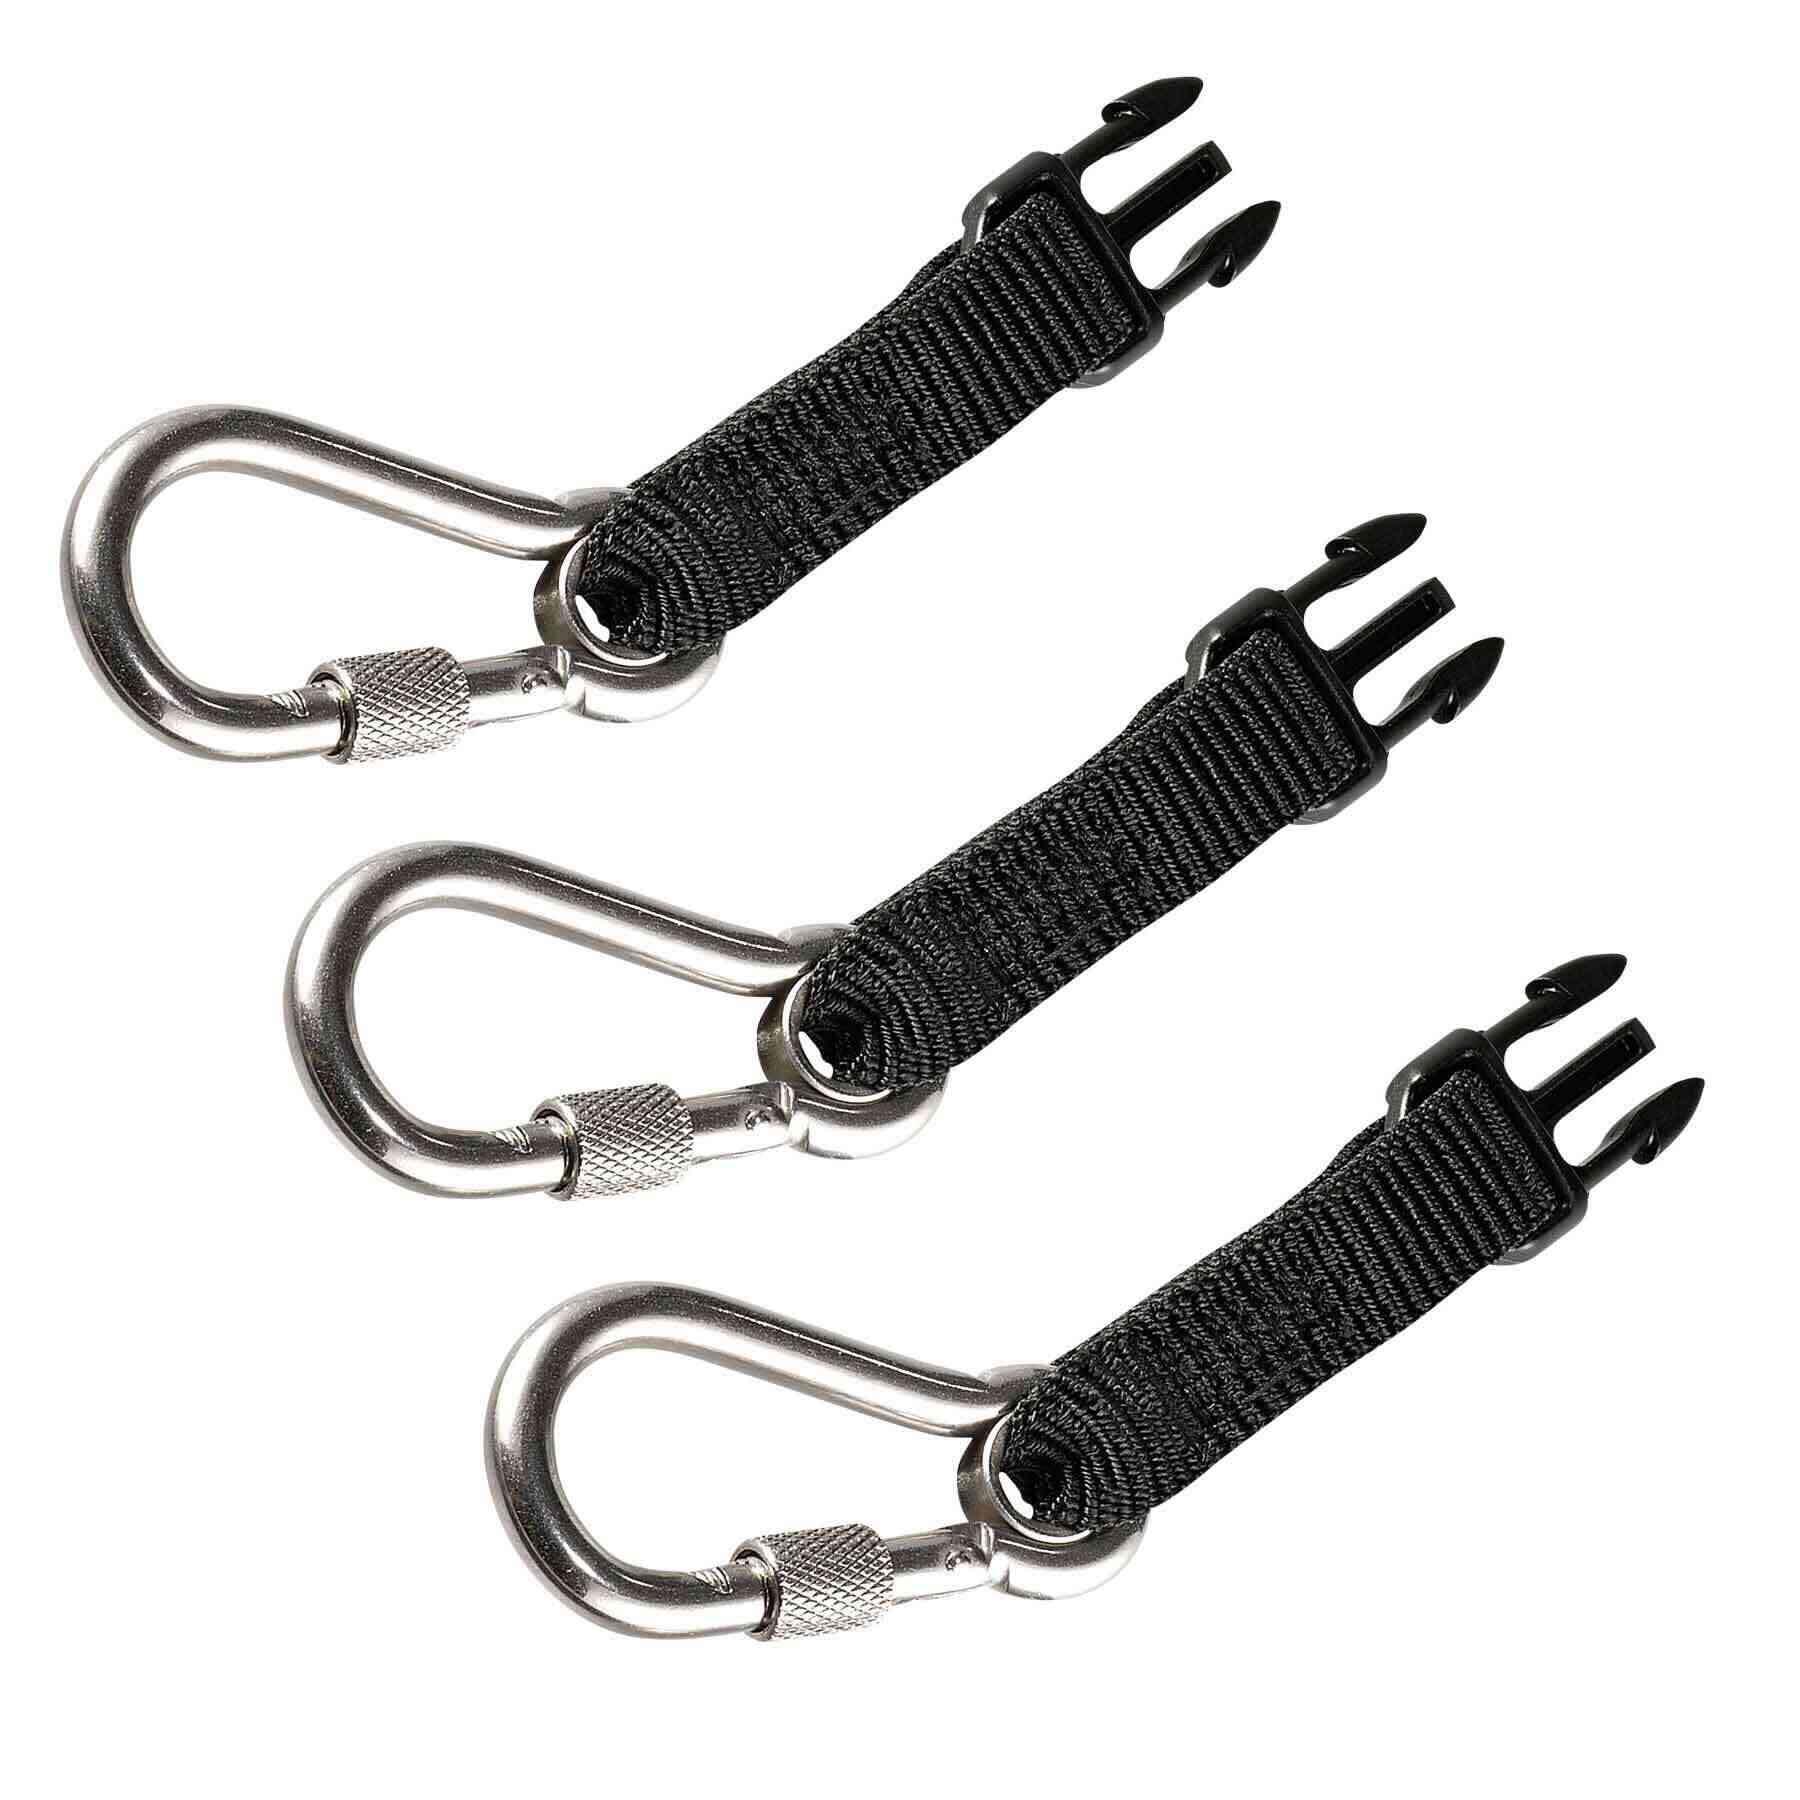 Tool Lanyard with Carabiner Attachment Retractable Elastic Rope